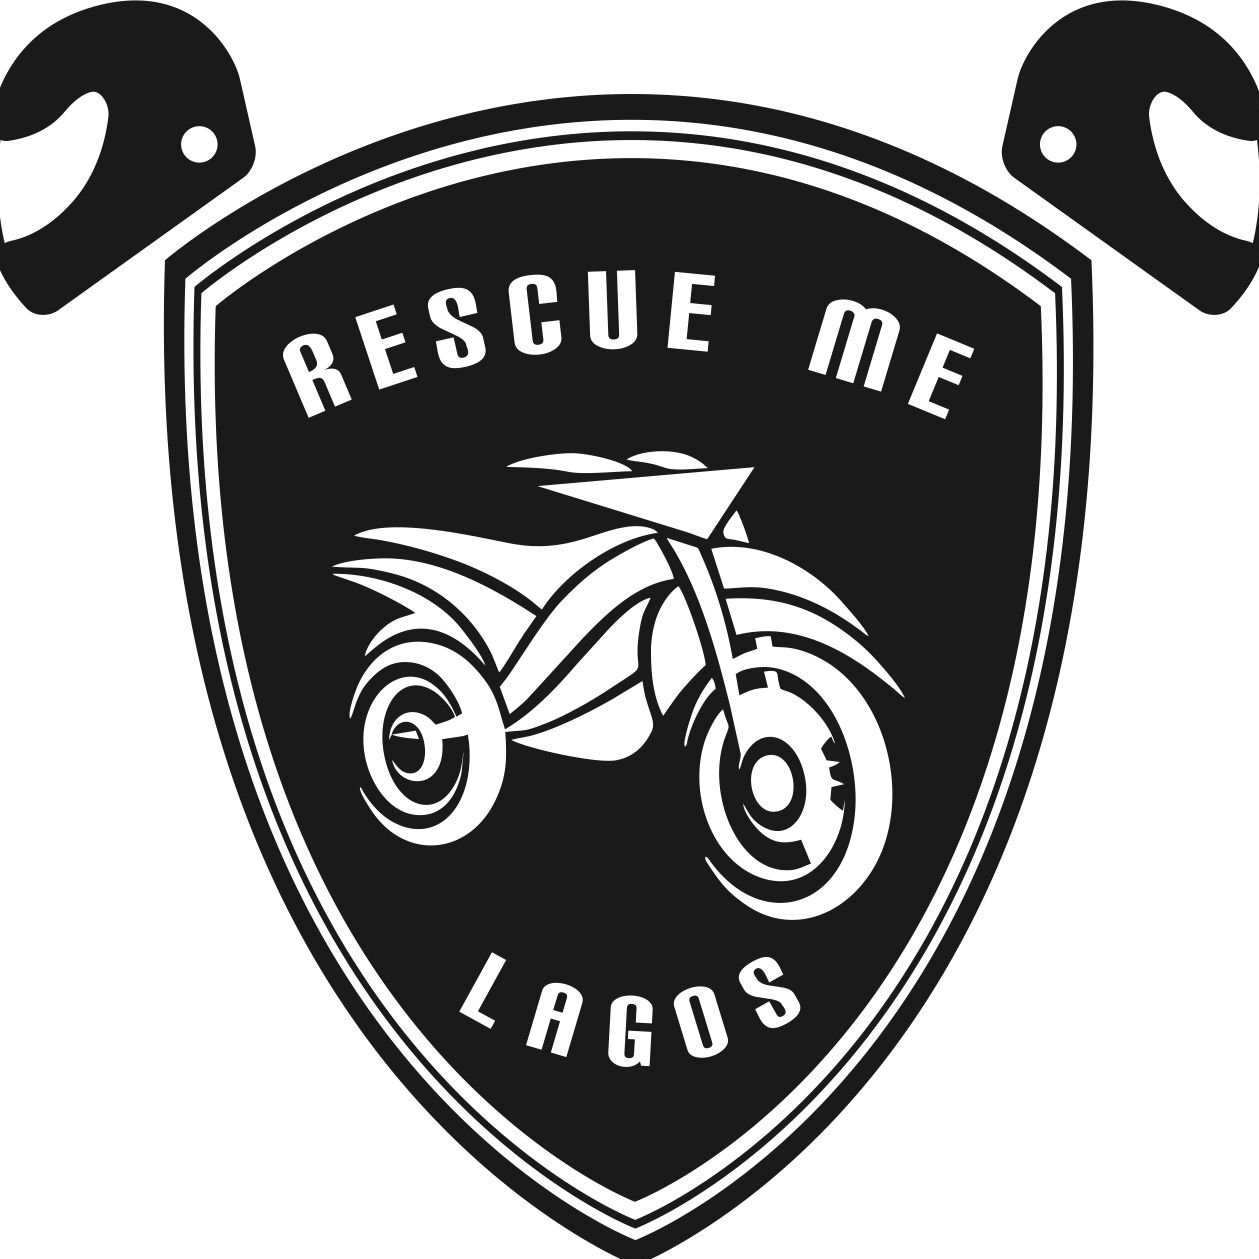 We offer 24hrs pick-up/rescue services to power-bikers within the Lagos Metropolis for free.